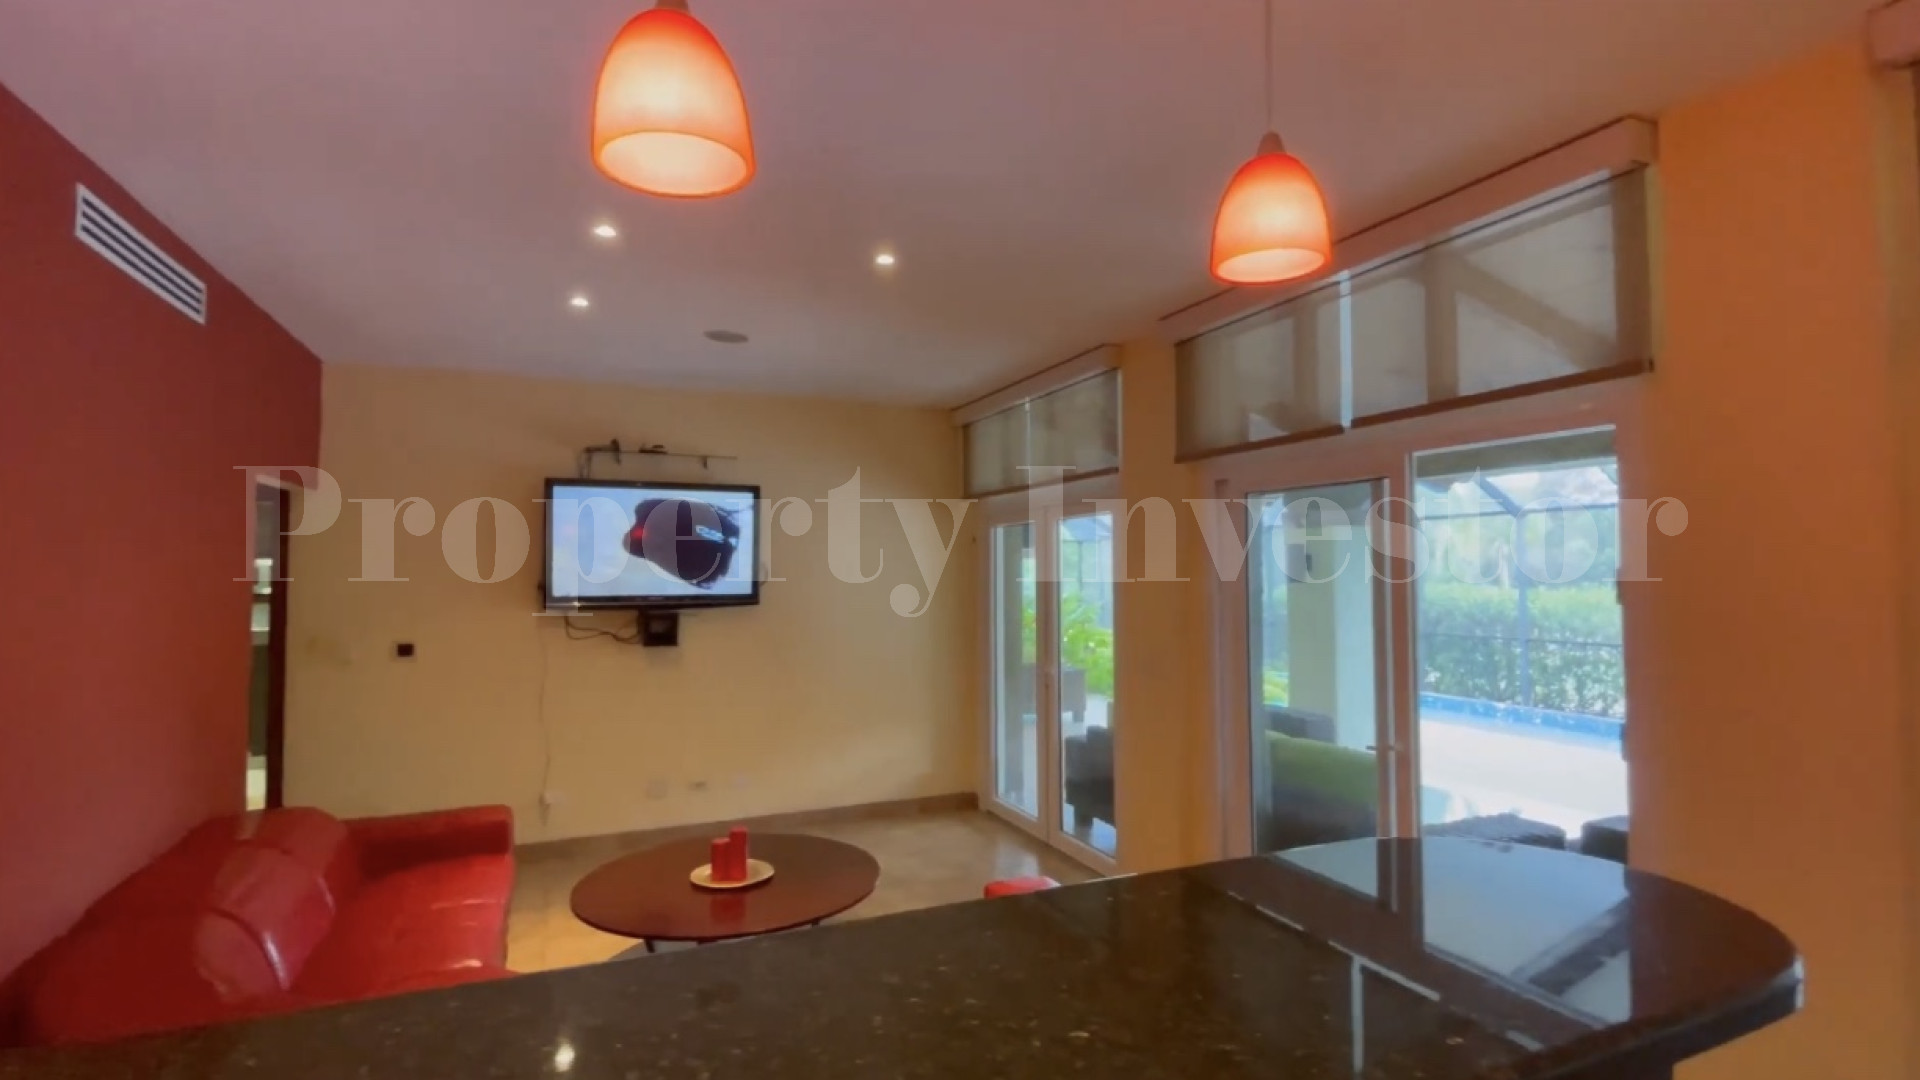 Outstanding 4 Bedroom Luxury Golf Club Residence for Sale in Cocoli, Panama City